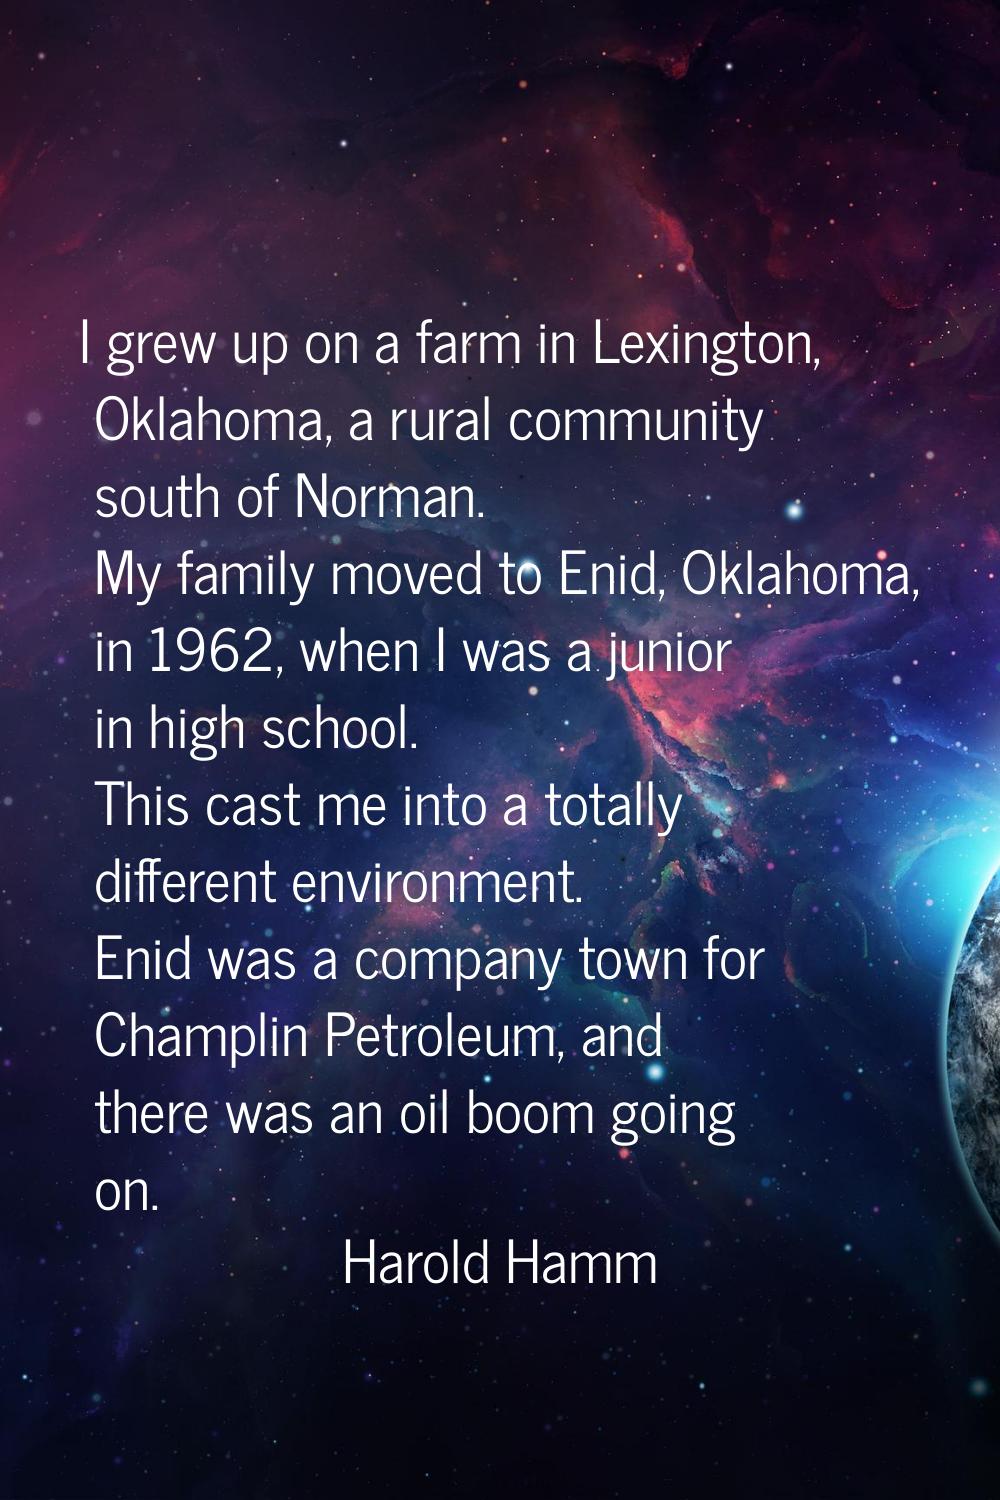 I grew up on a farm in Lexington, Oklahoma, a rural community south of Norman. My family moved to E